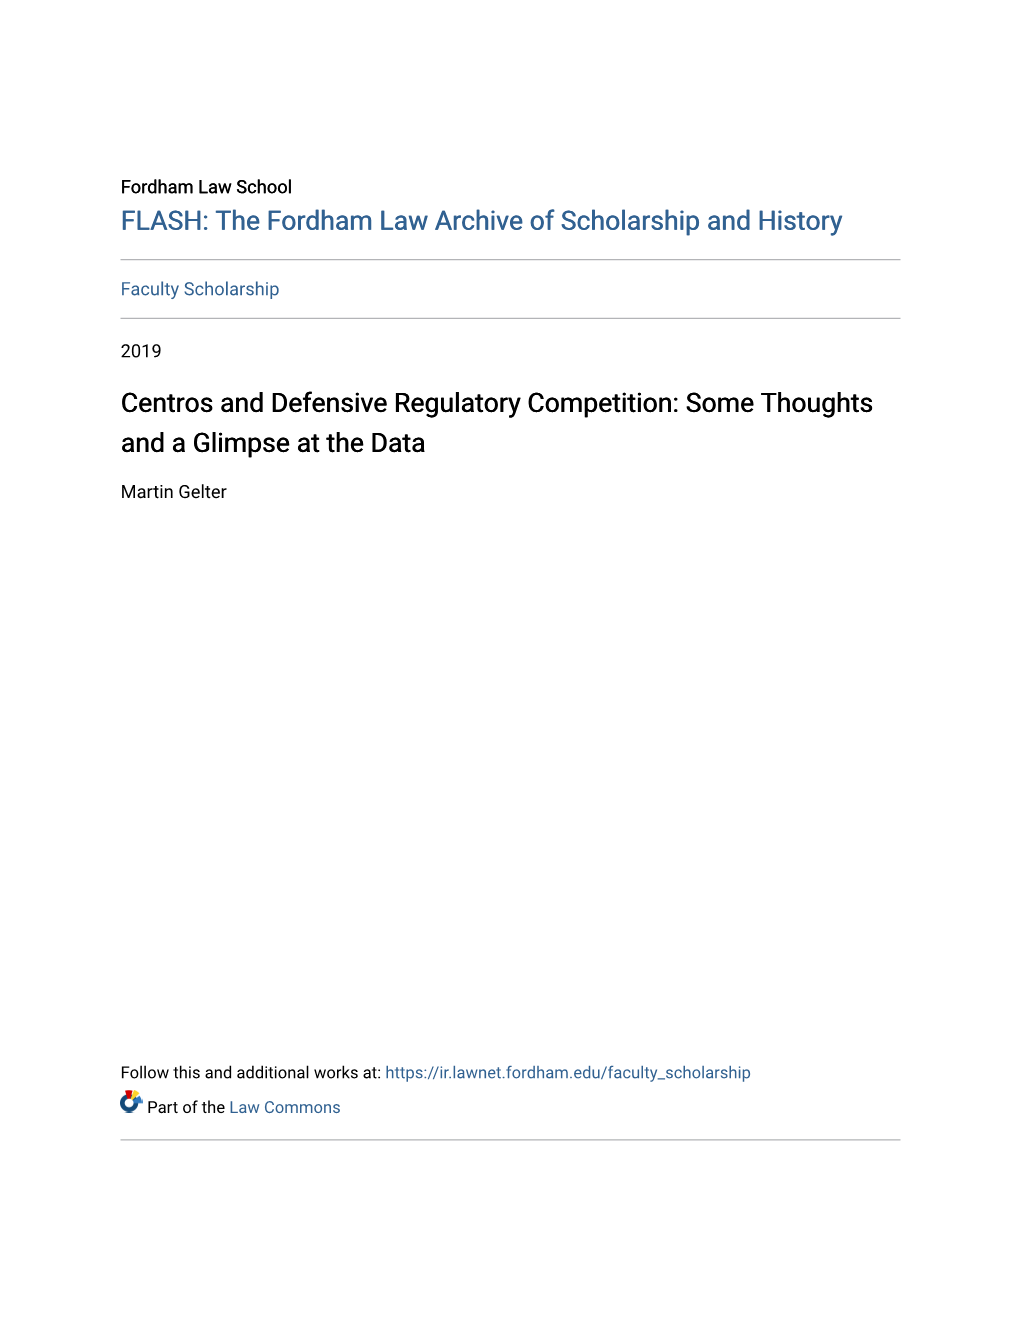 Centros and Defensive Regulatory Competition: Some Thoughts and a Glimpse at the Data